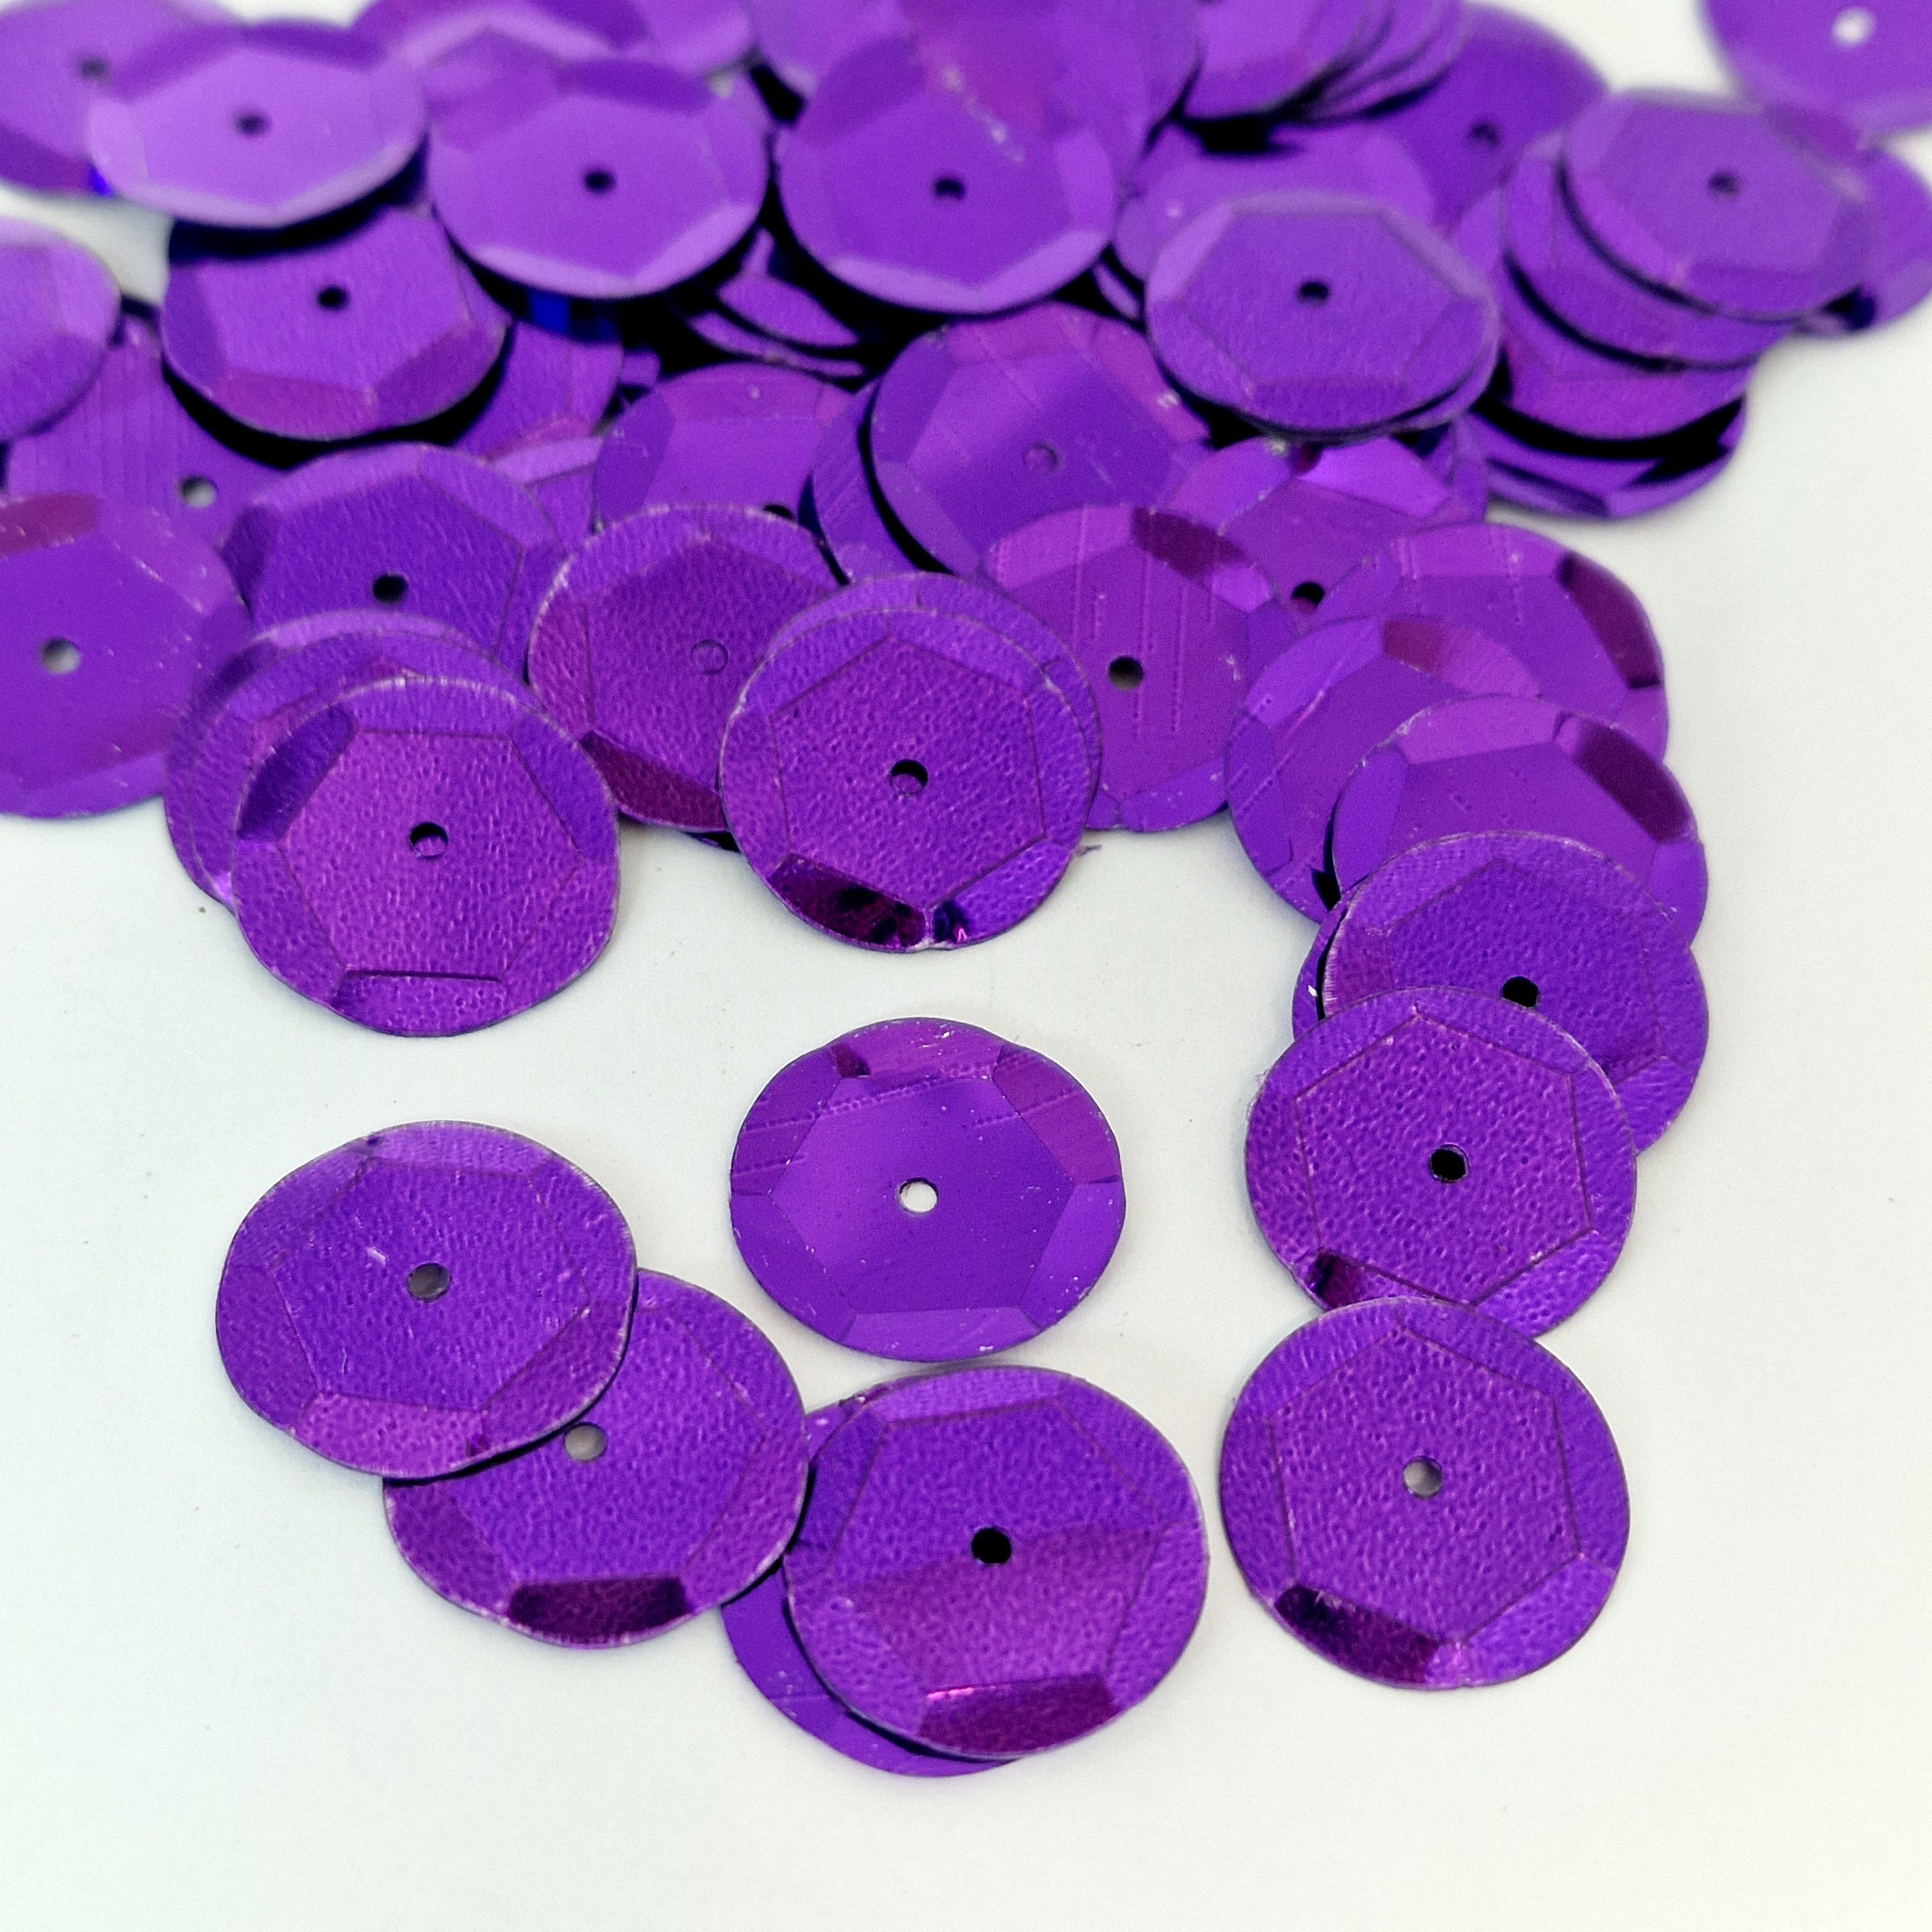 MajorCrafts 40grams 15mm Royal Purple Large Round Sew-On Cup Sequins